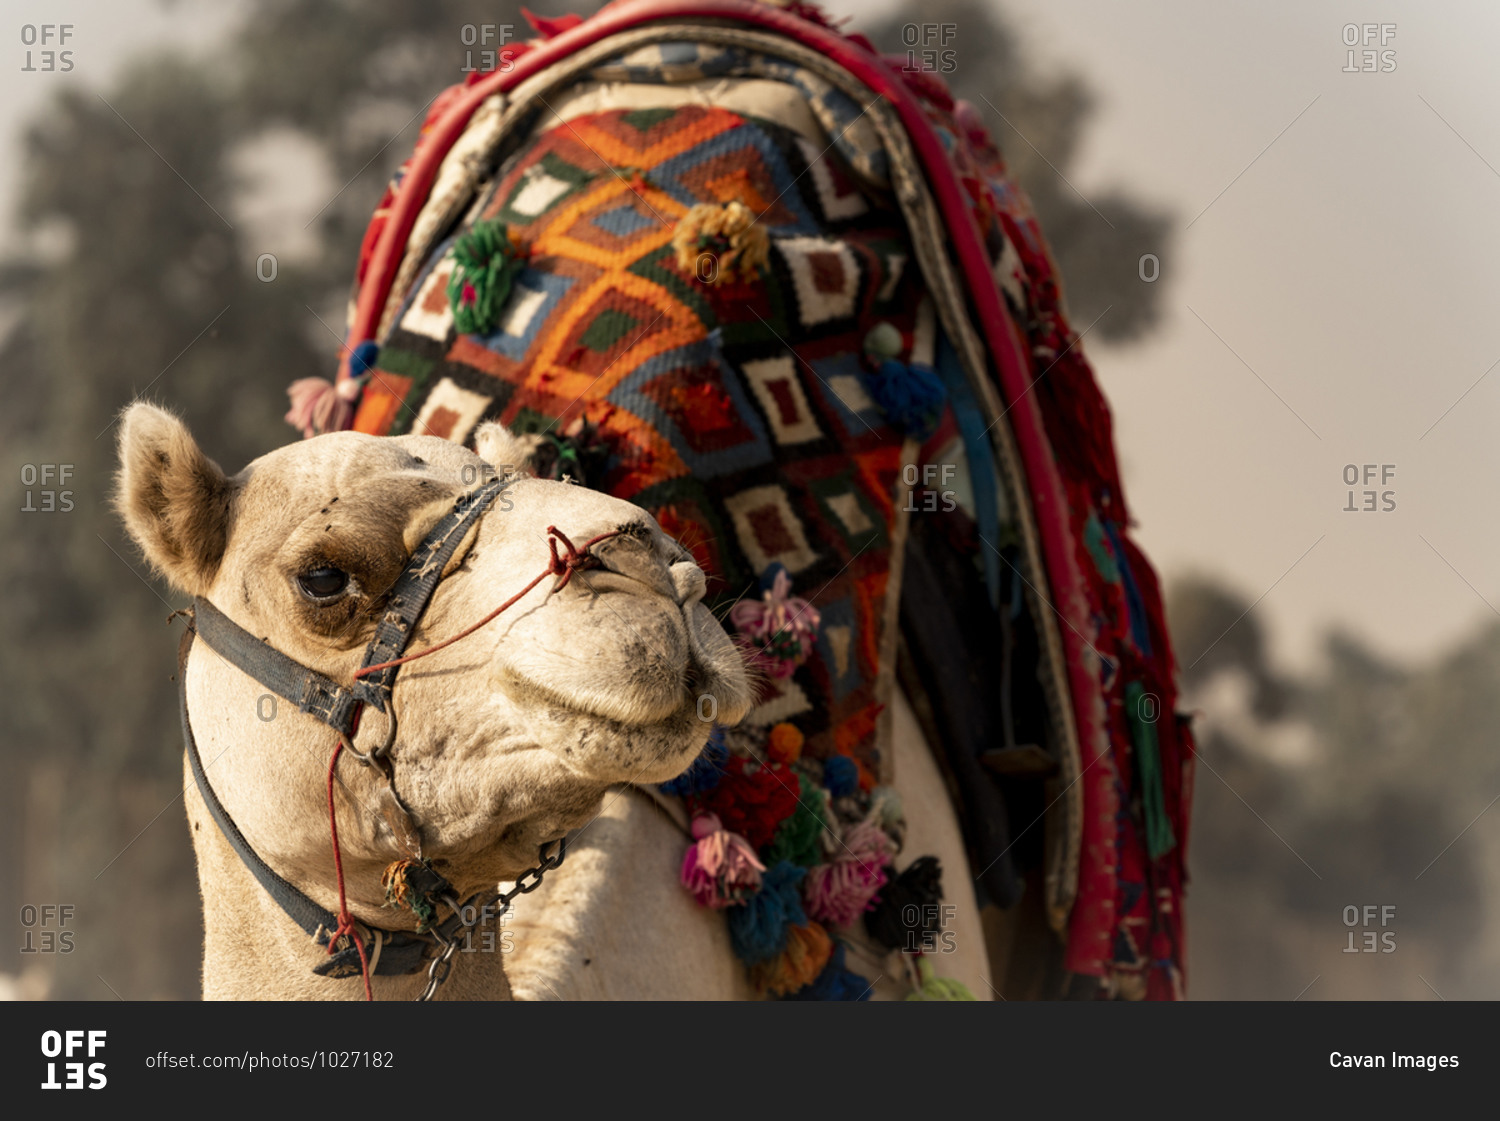 A camel stands in the desert waiting to give a ride in Giza, Egypt